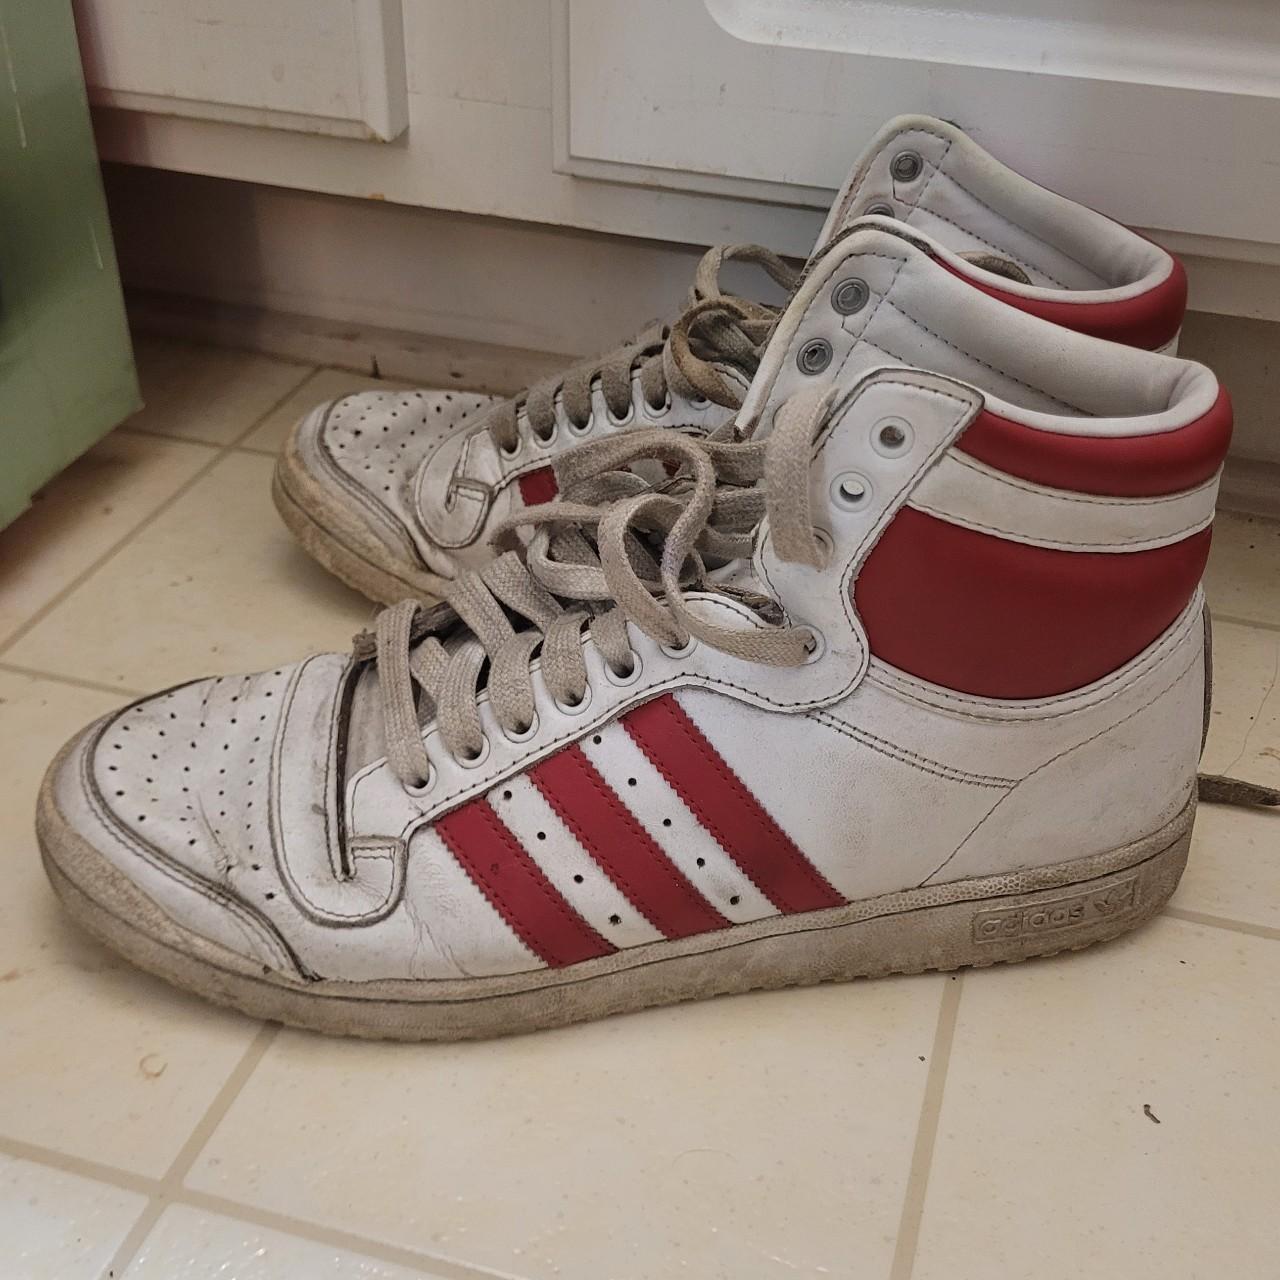 Adidas top 10s in a harder to find colorway size 10. - Depop